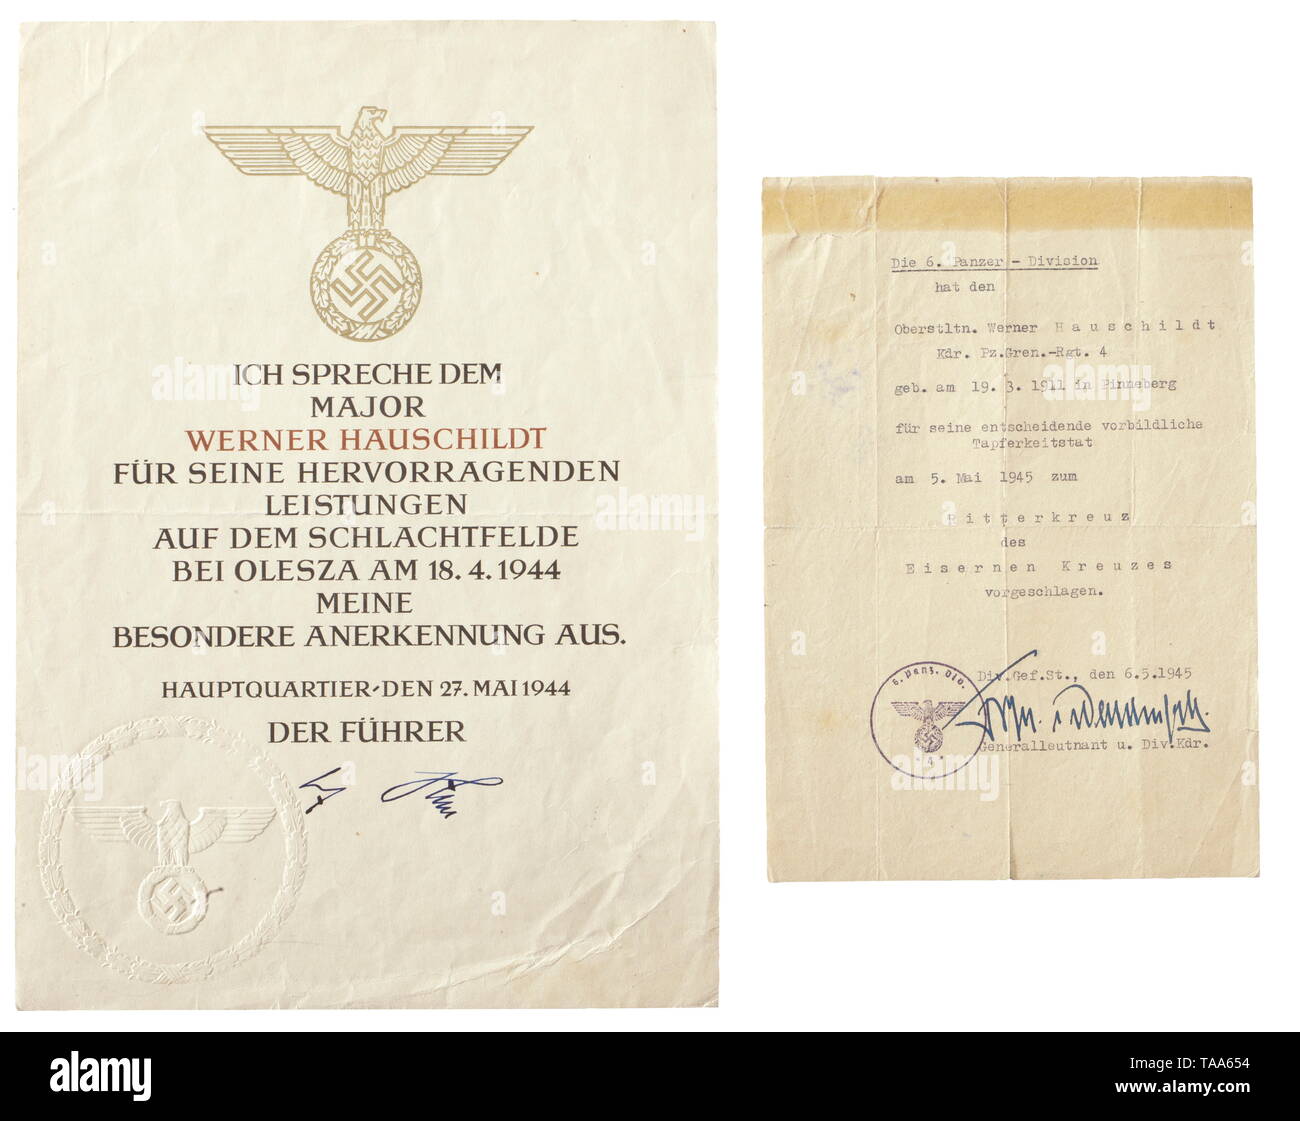 Documents and photos of Oberstleutnant Werner Hauschildt, commander of Panzer Grenadier Regiment '4' in 6th Panzer Division Documents: Commendation Certificate for Outstanding Services on the Battlefield of 'Olesha' dated 27 May 1944 with original signature of Adolf Hitler, dimensions 21 x 29.5 cm. Recommendation for the Knight's Cross of the Iron Cross dated 6 May 1945 with original signature of General Freiherr von Waldenfeld. Preliminary possession document for the German Cross in Gold dated 30 April 1943, along with various best wishes letters and telegrams. Award docum, Editorial-Use-Only Stock Photo